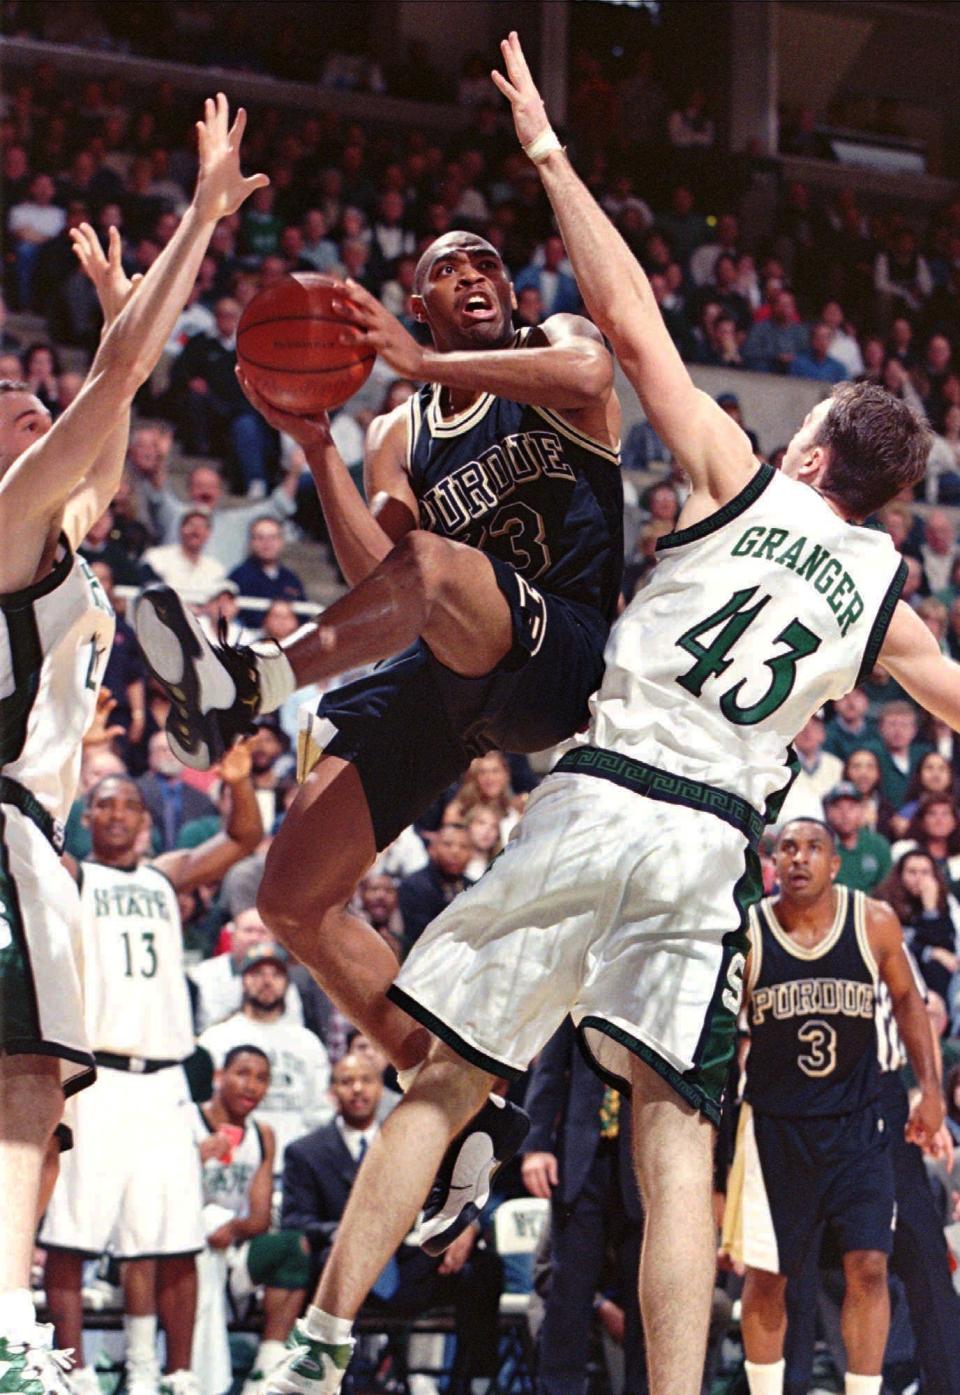 Purdue's Mike Robinson (23)  goes up for two points against Michigan State's A. J. Granger (43) and Jason Klein left  during the first half of play at the Breslin Arena in East Lansing Mich. Sunday March 1 1998. The Spartans lost to the Boilermakers in overtime 99-96.